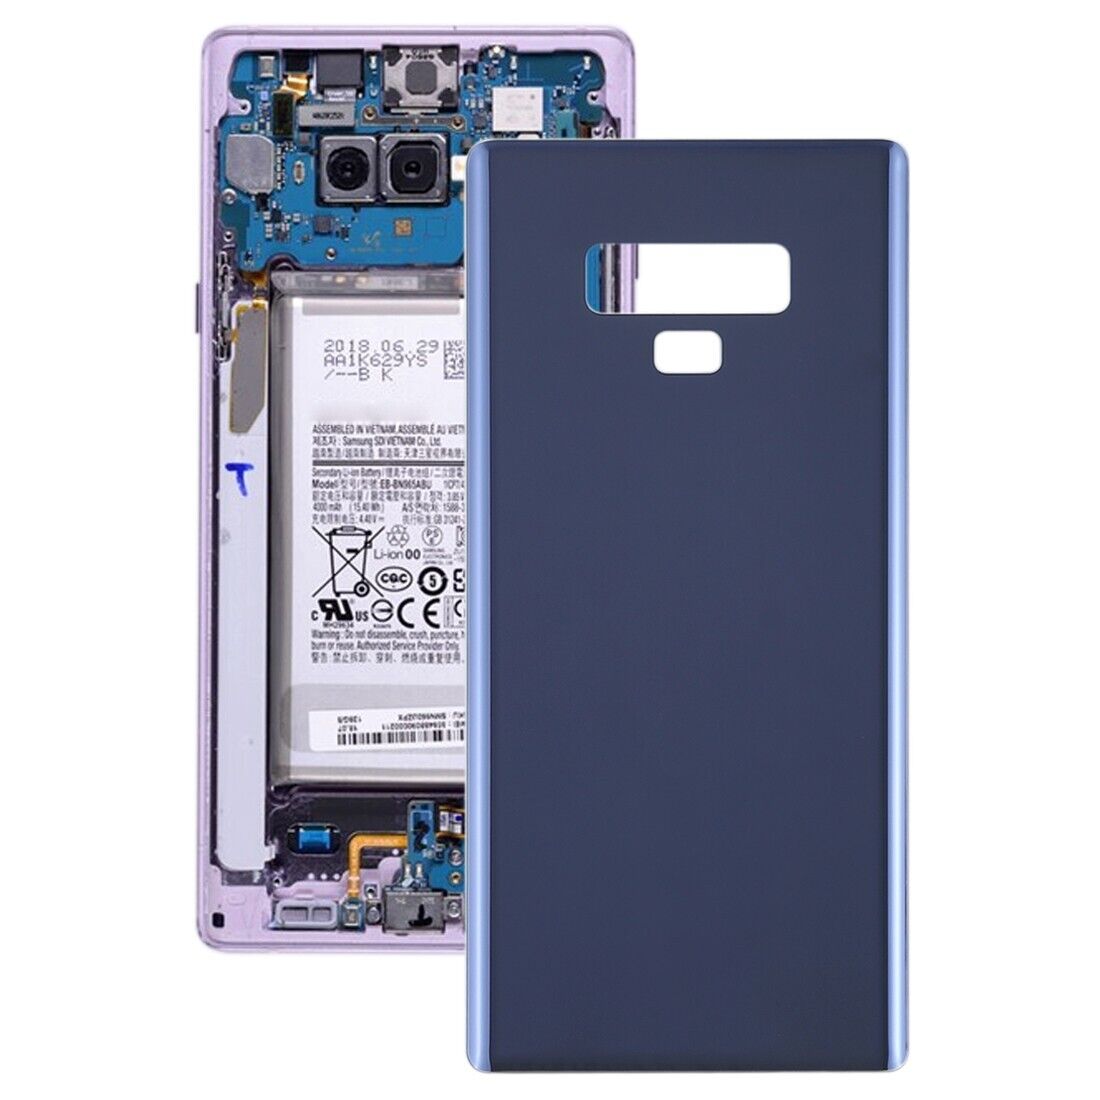 For Galaxy Note9 / N960A / N960F Back Cover (Blue)